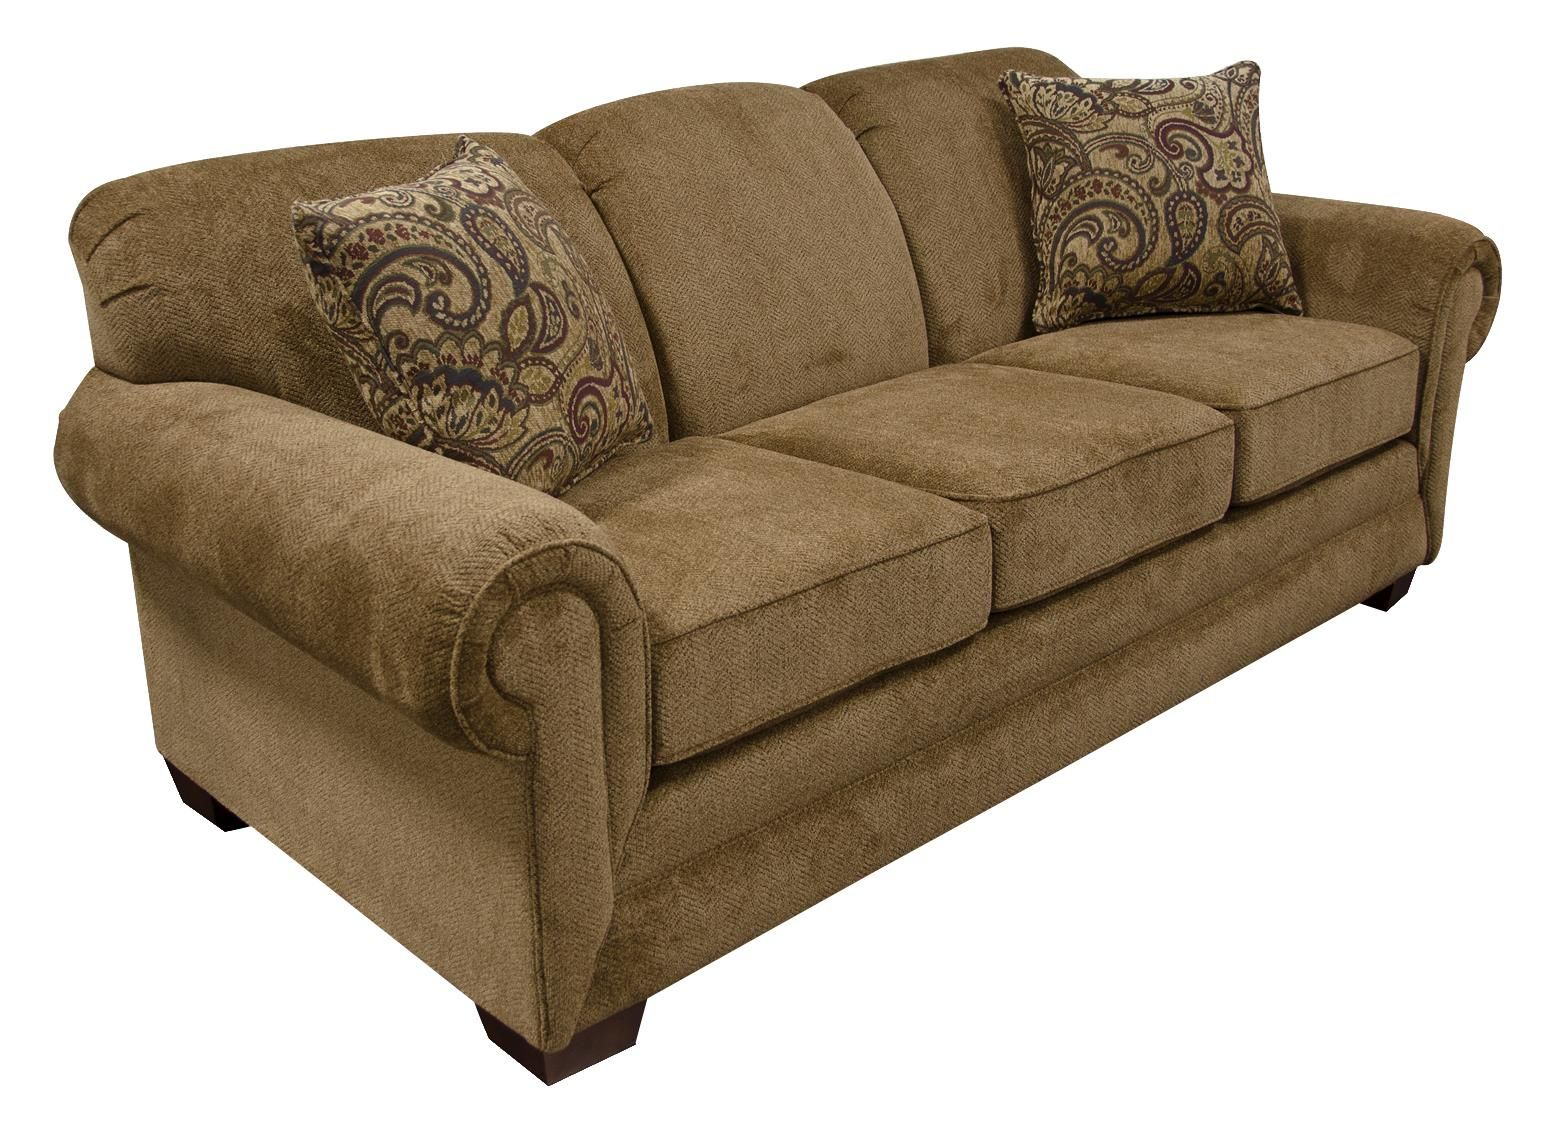 comparisons to england sofa bed